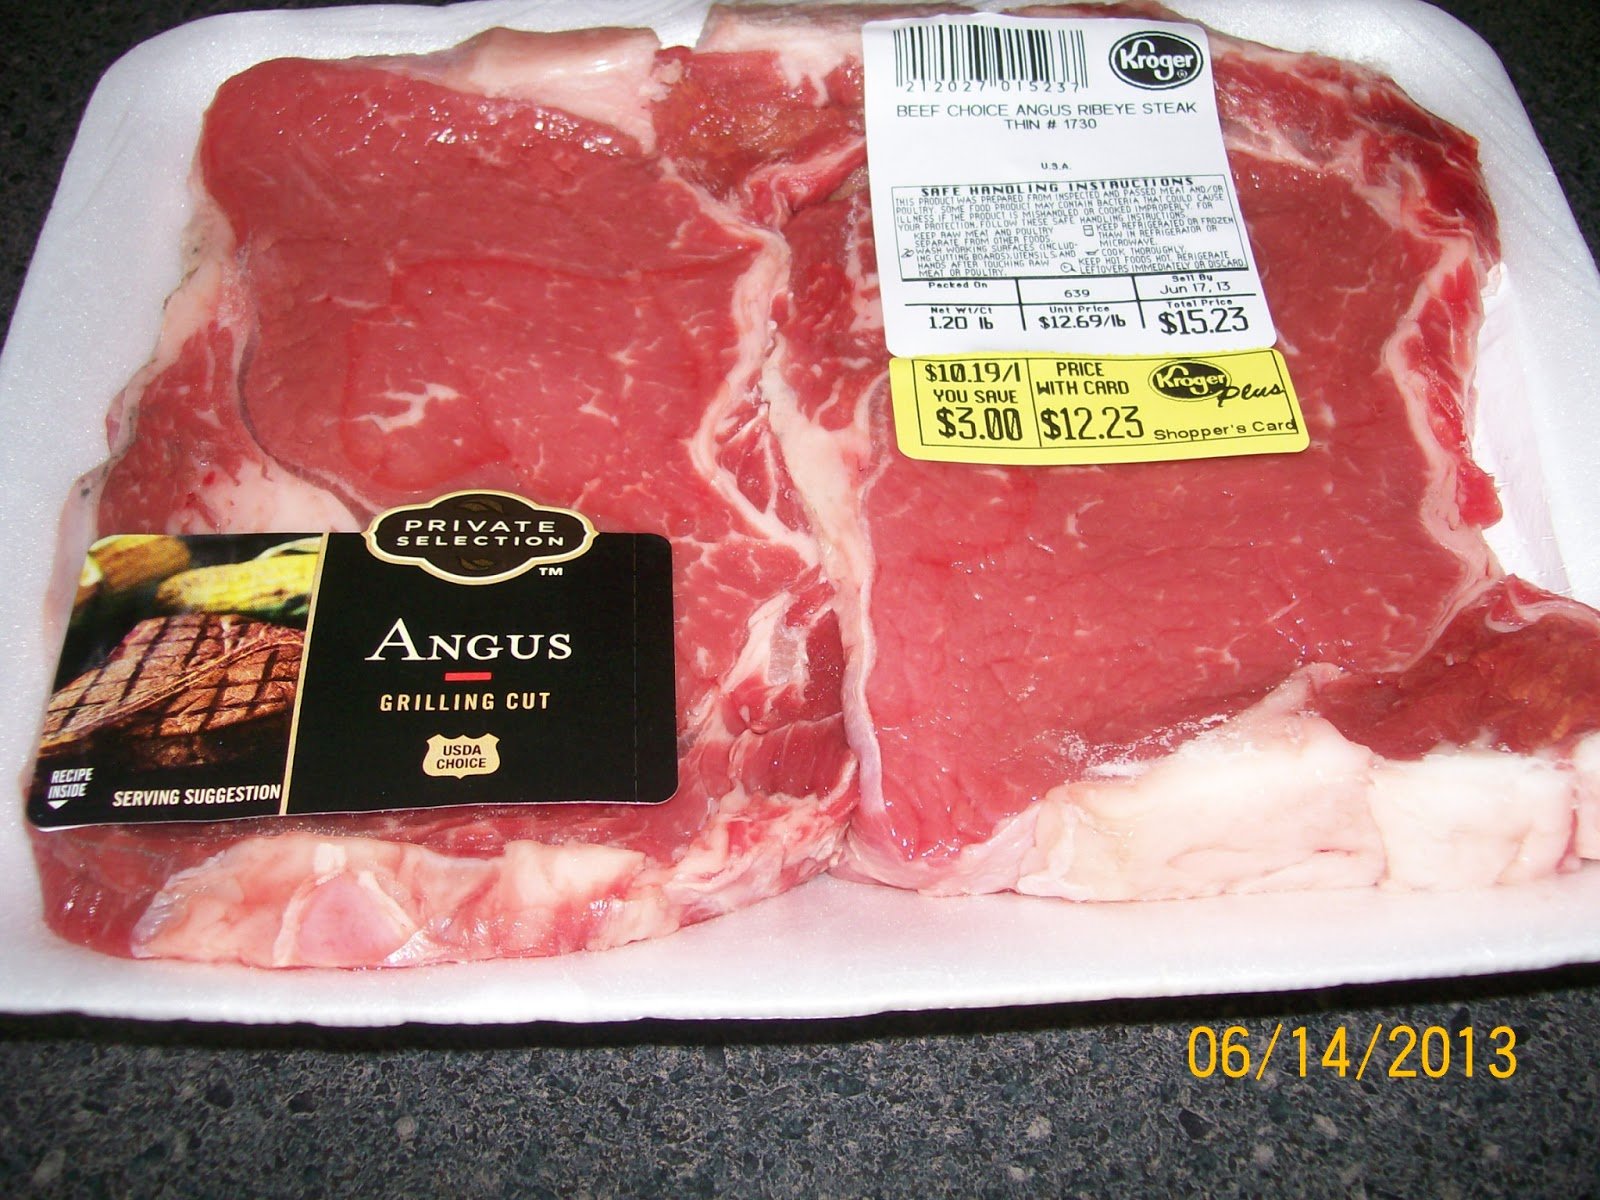 I Luv to Eat Food: Private Selection Angus Ribeye Steak